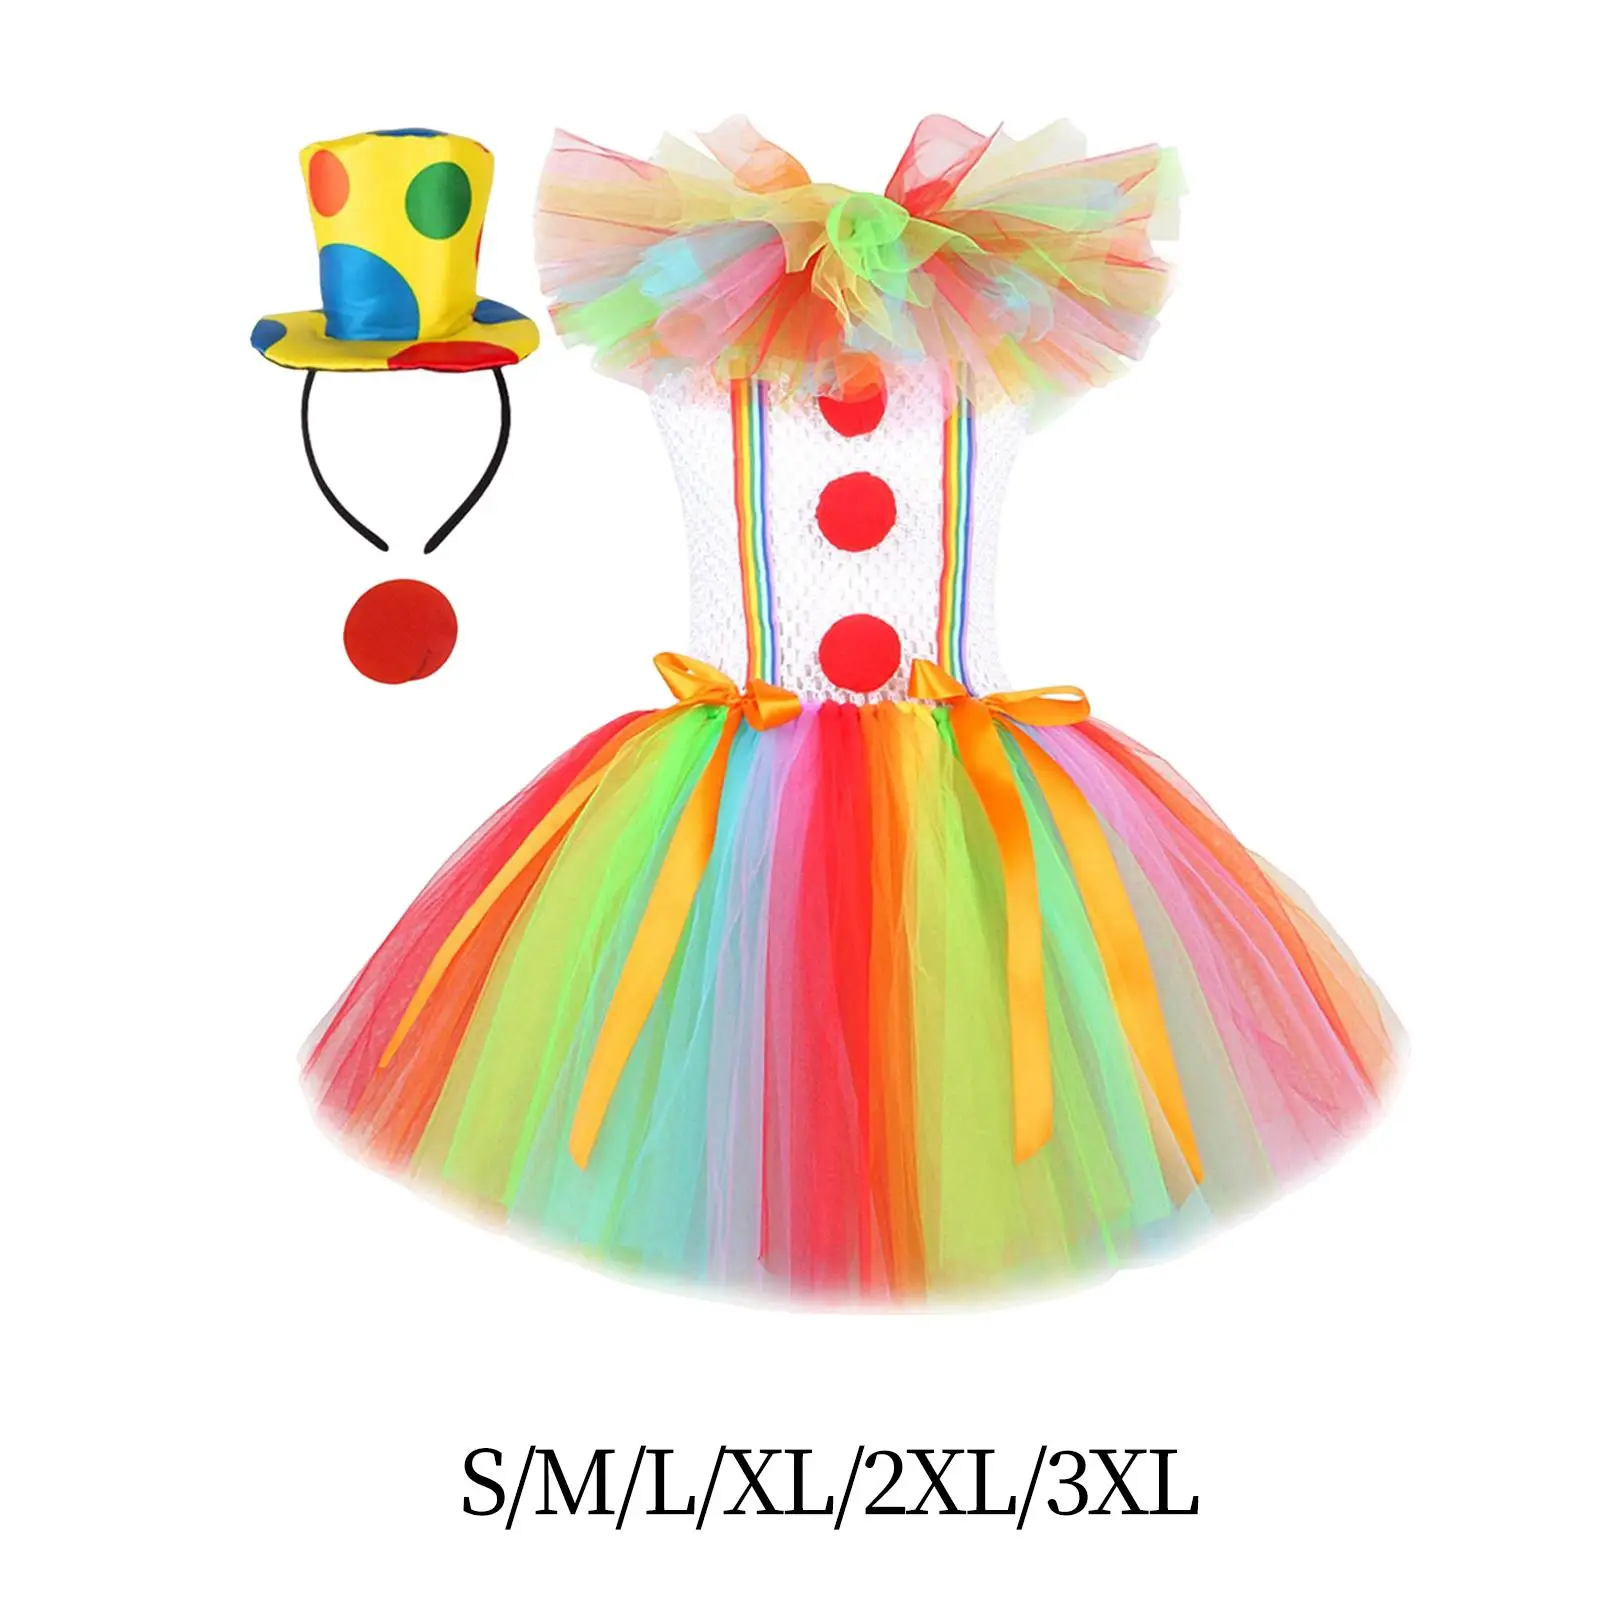 Child Girl Clown Costume Mesh Tutu Dress Outfits with Hat Hair Hoop Fancy Dress up Costume for Halloween Accessory Exquisite